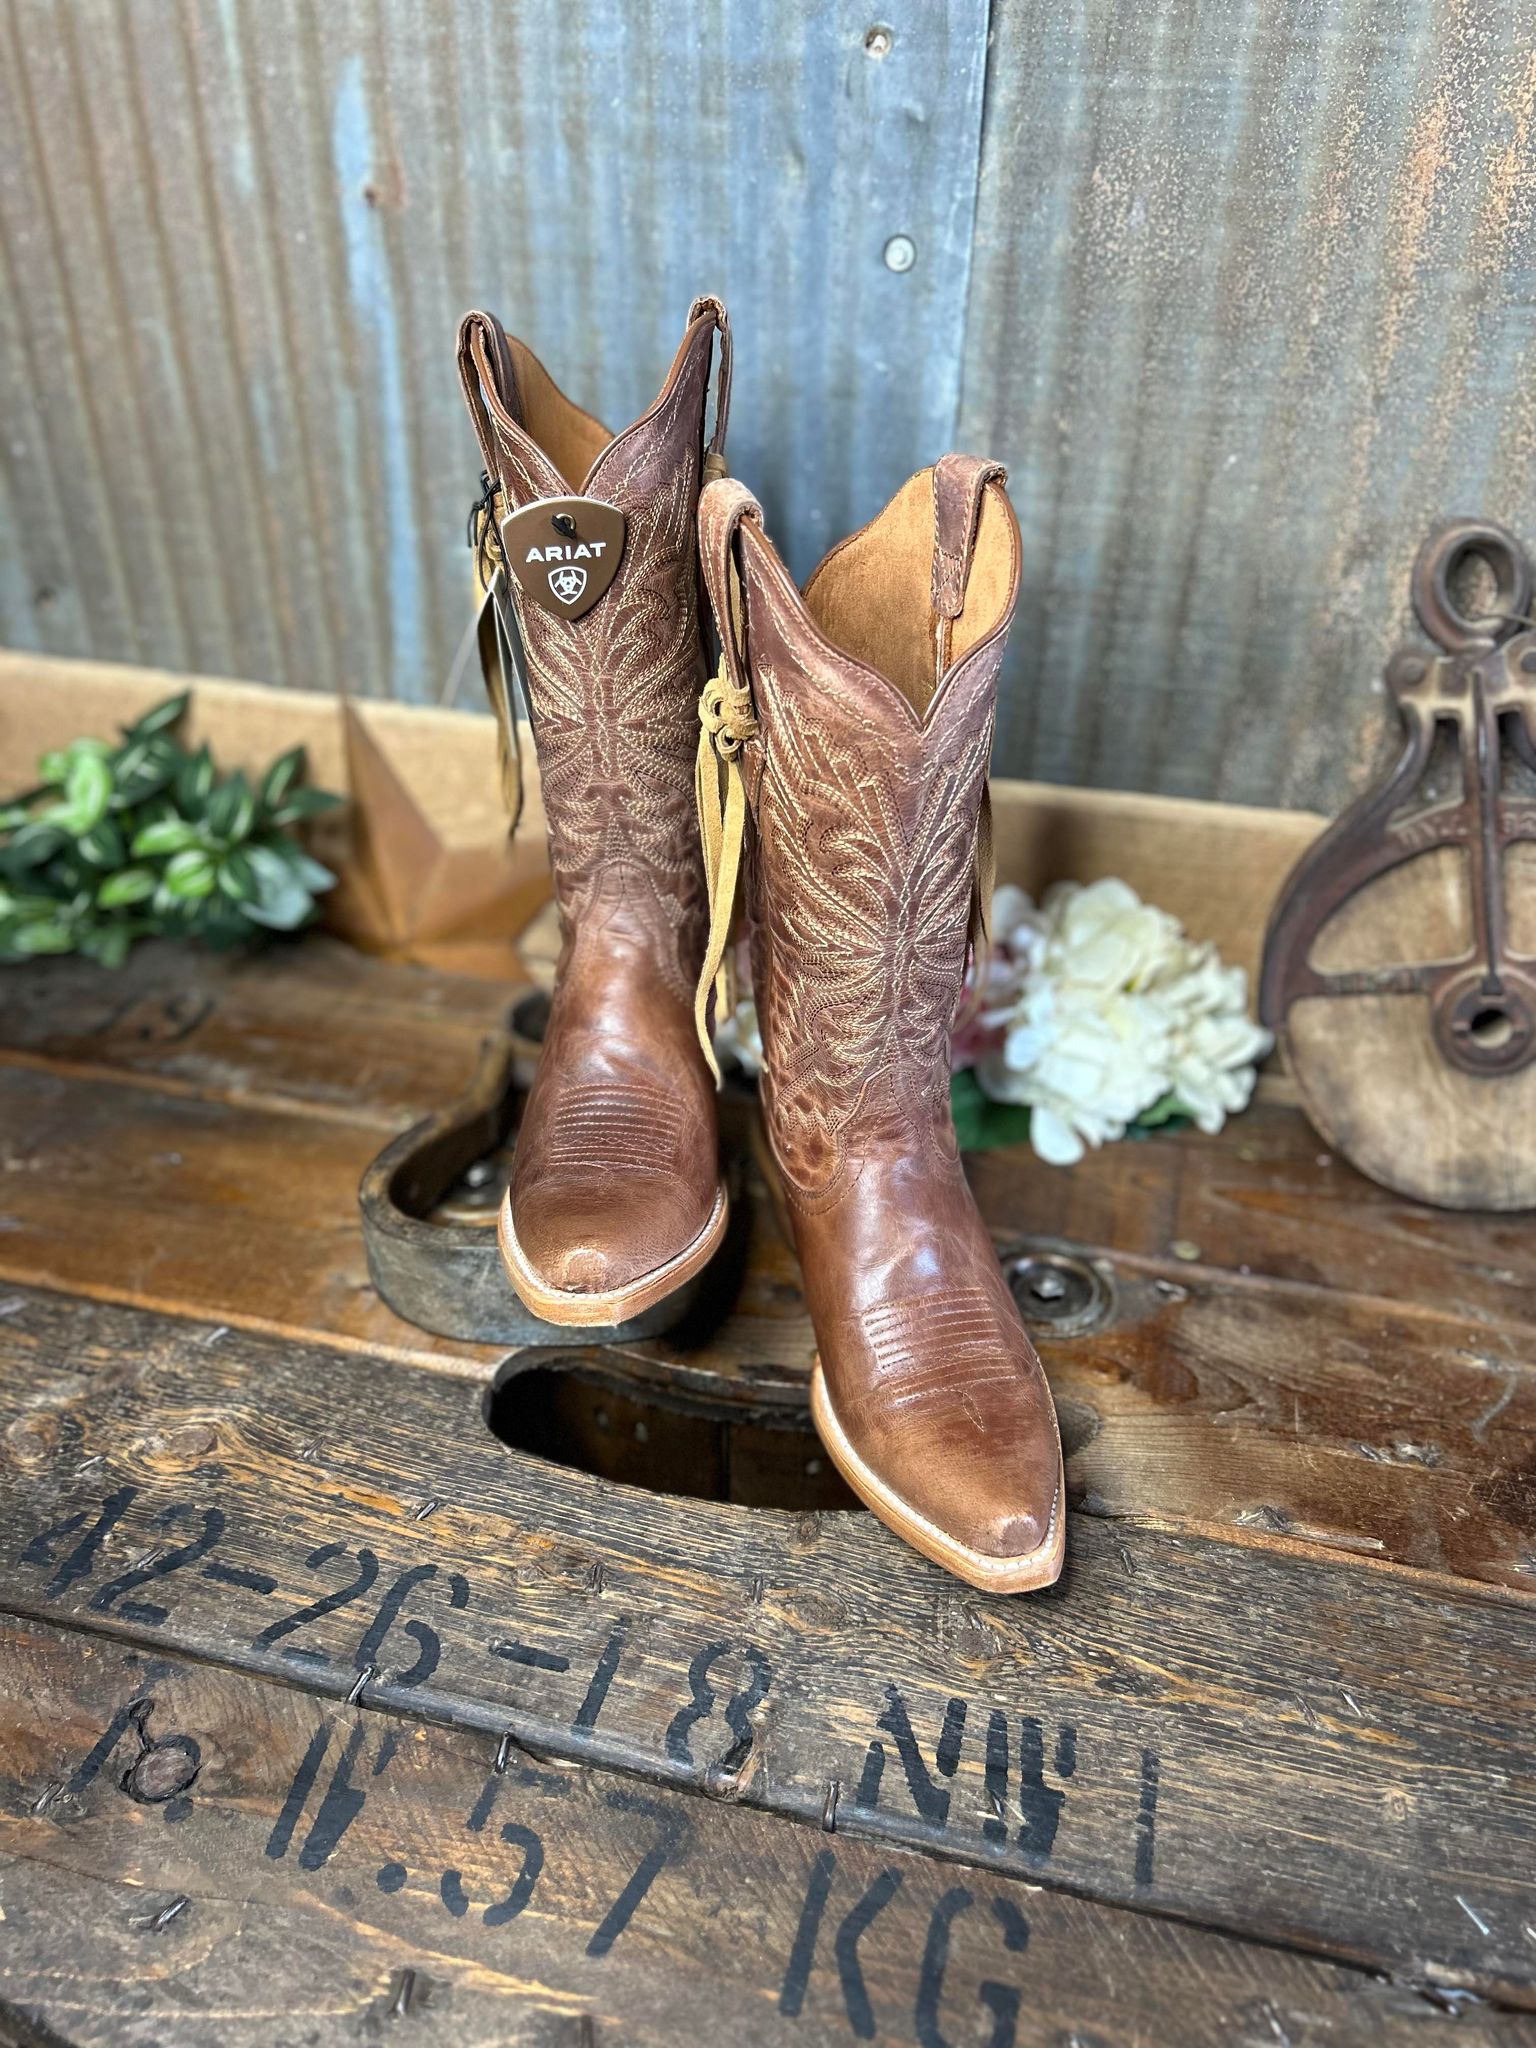 Ariat Women's Martina Ole Tan Boot-Women's Boots-Ariat-Lucky J Boots & More, Women's, Men's, & Kids Western Store Located in Carthage, MO